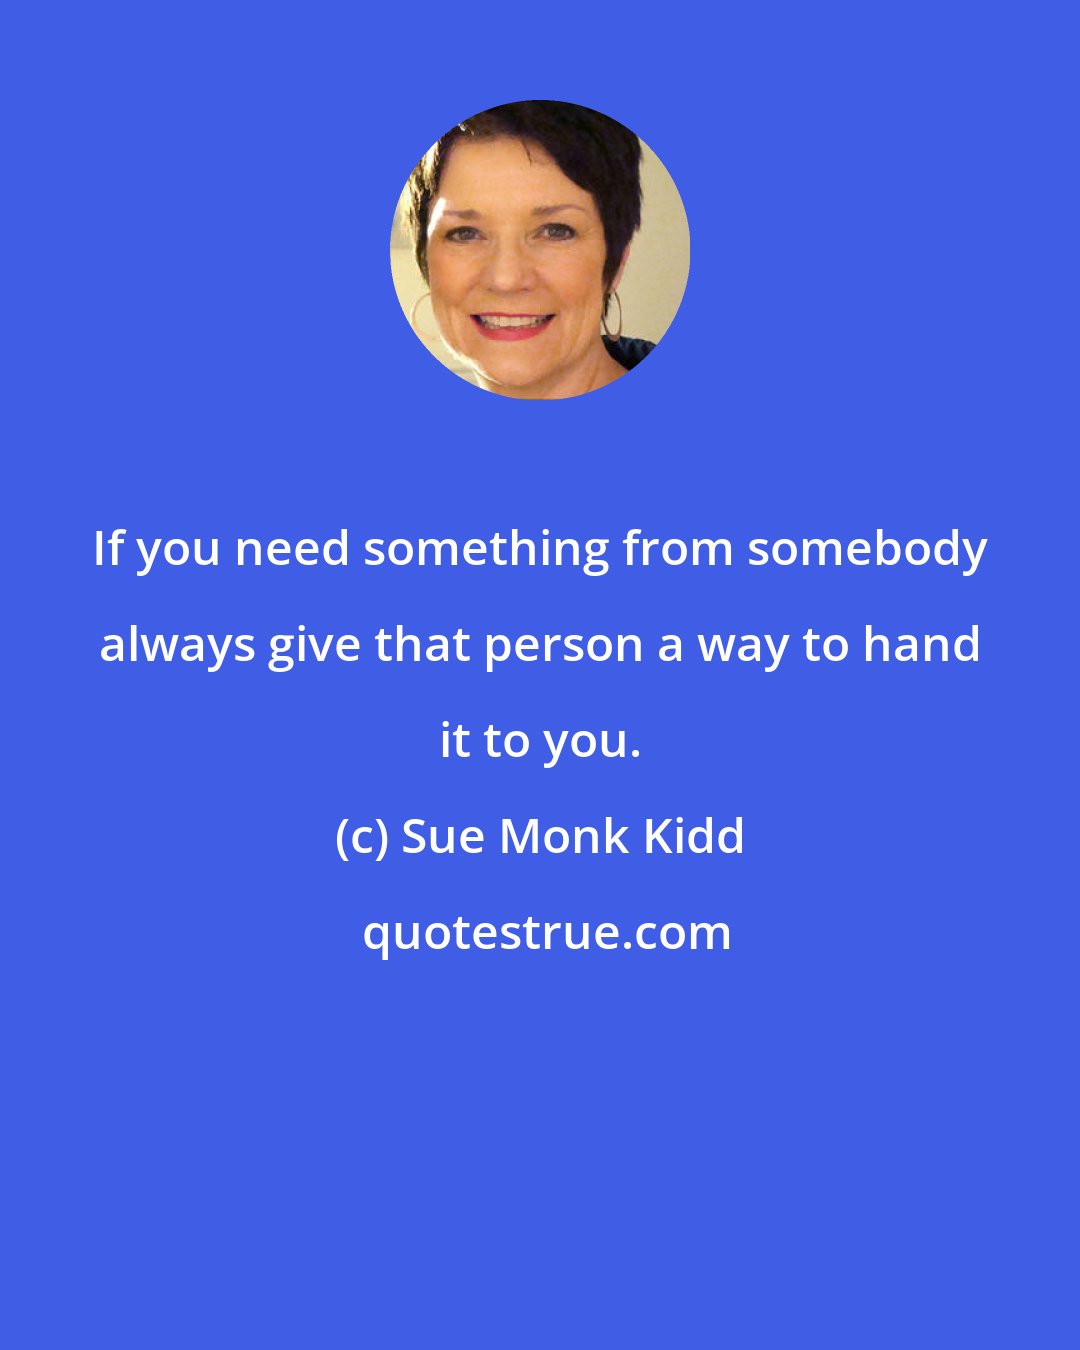 Sue Monk Kidd: If you need something from somebody always give that person a way to hand it to you.